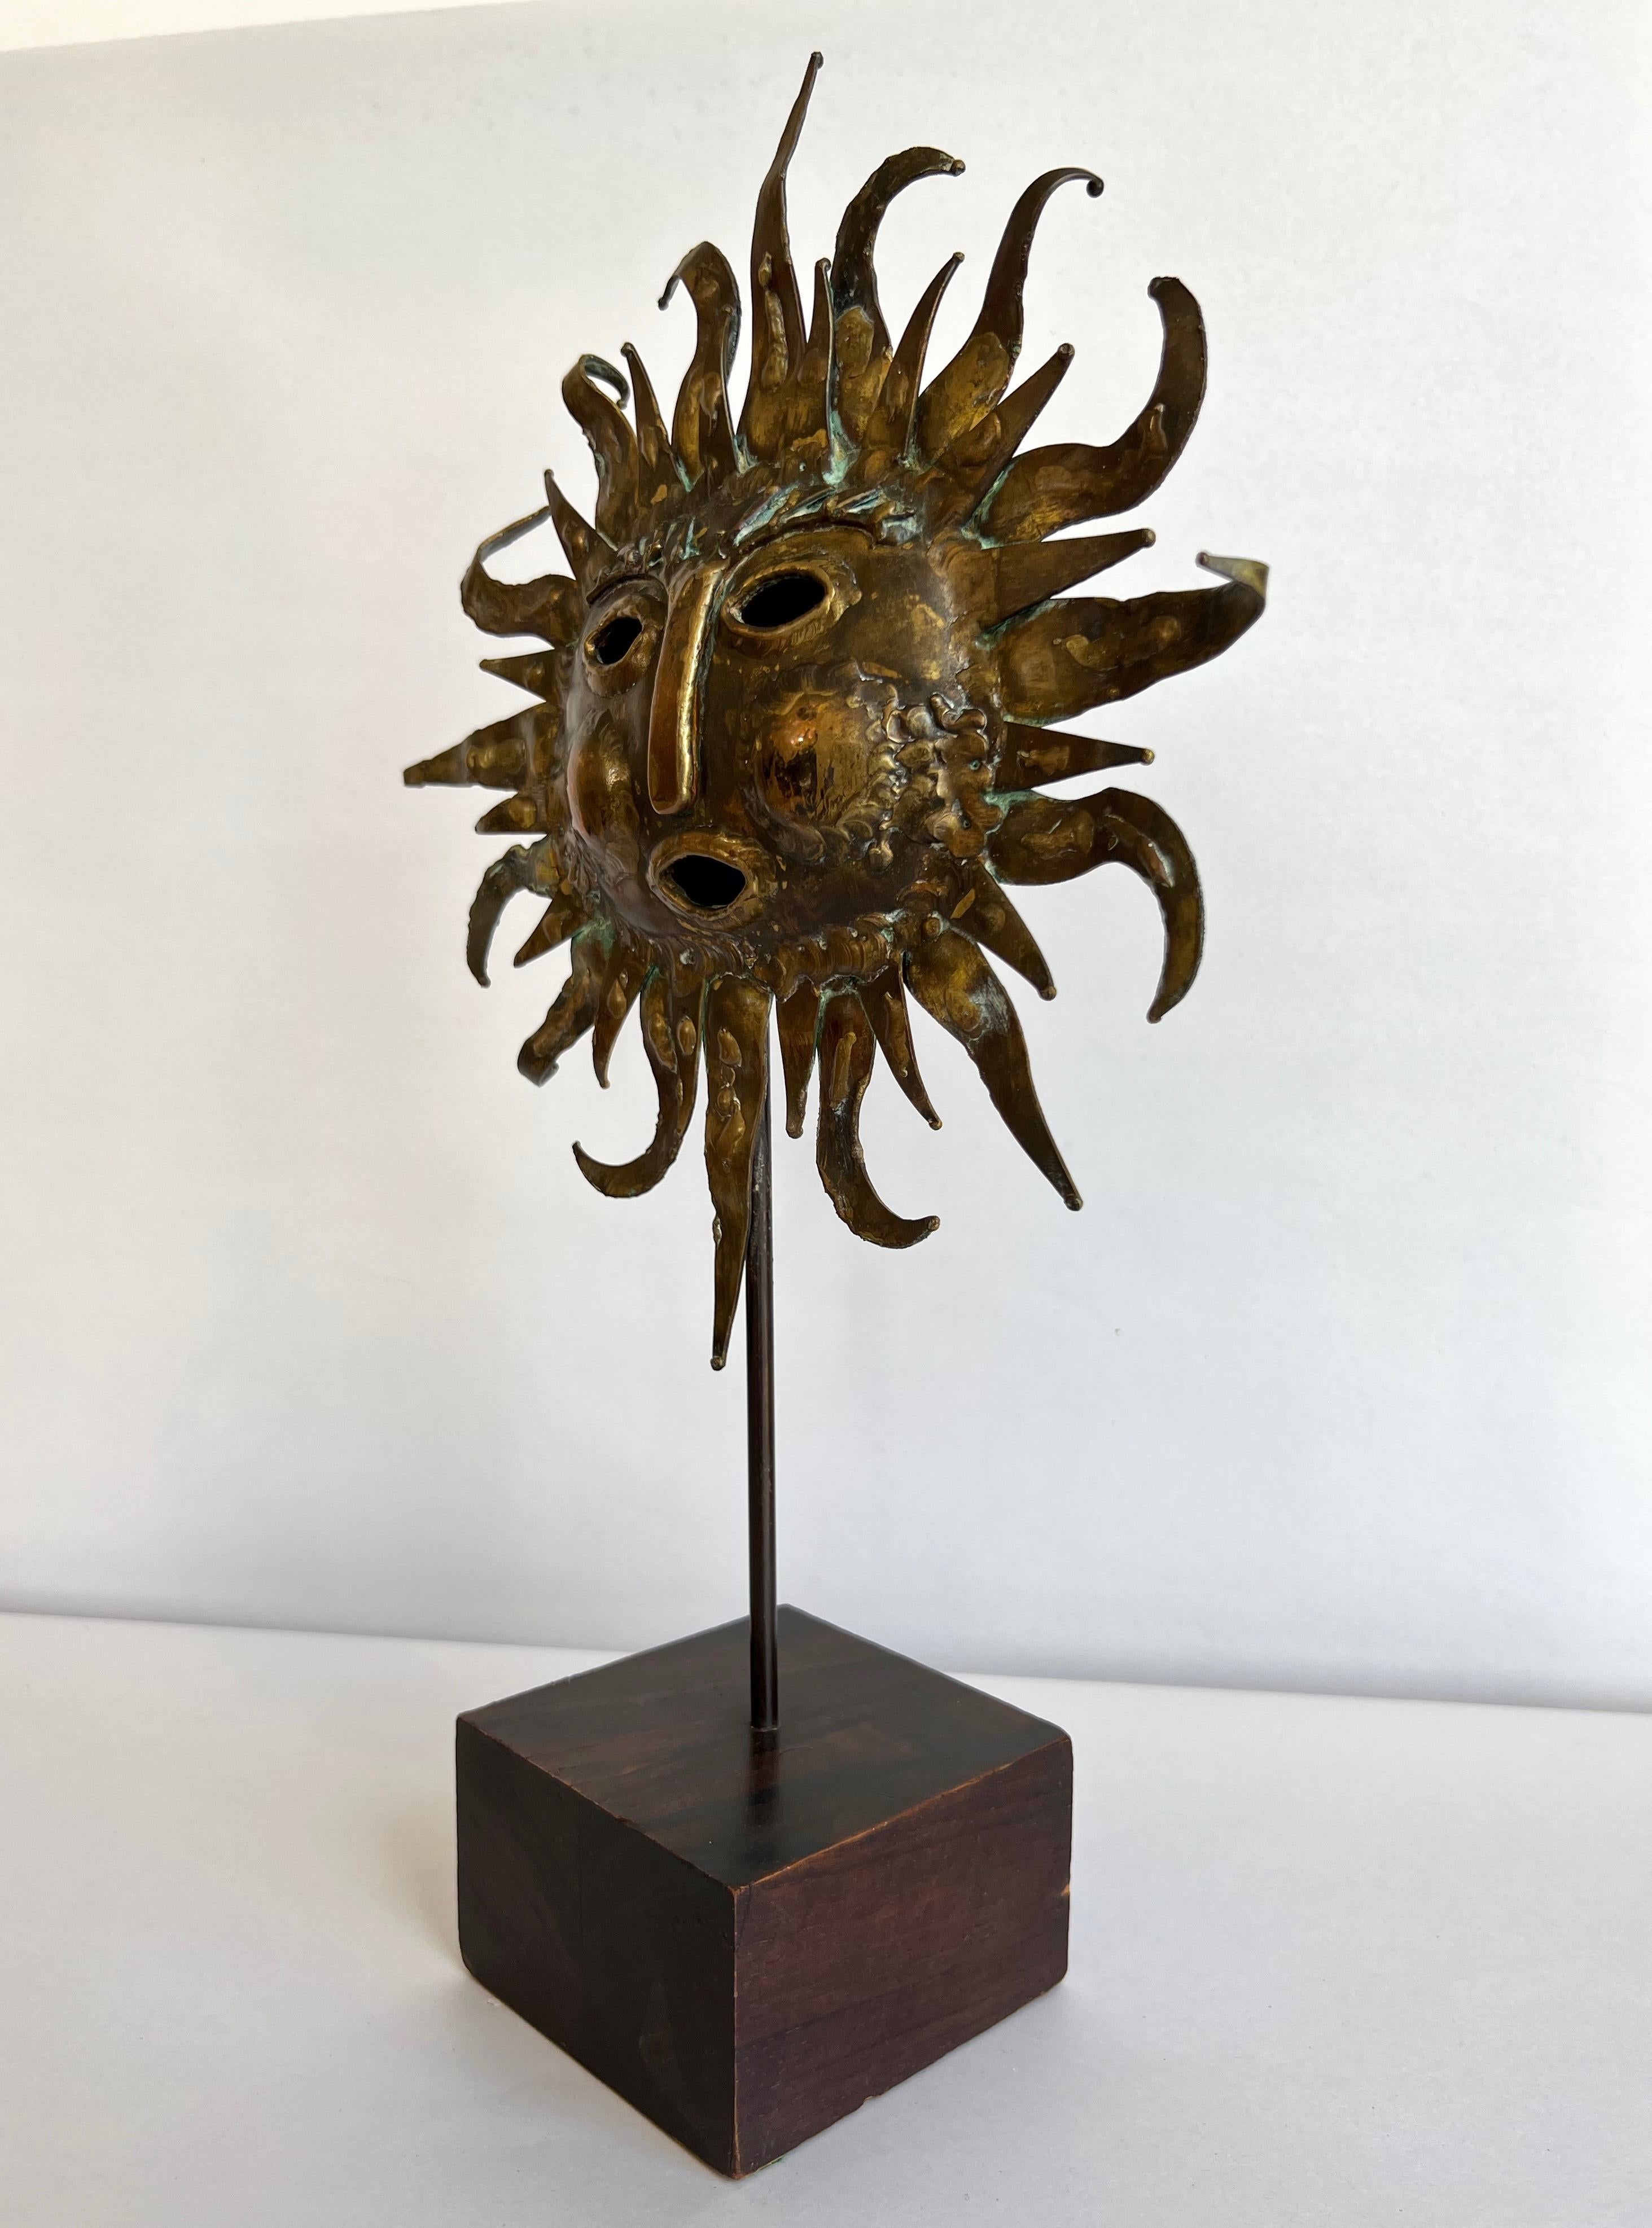 Emaús Brutalist Brass and Bronze Sun Face Sculpture on Stand, Signed, 1960s For Sale 4